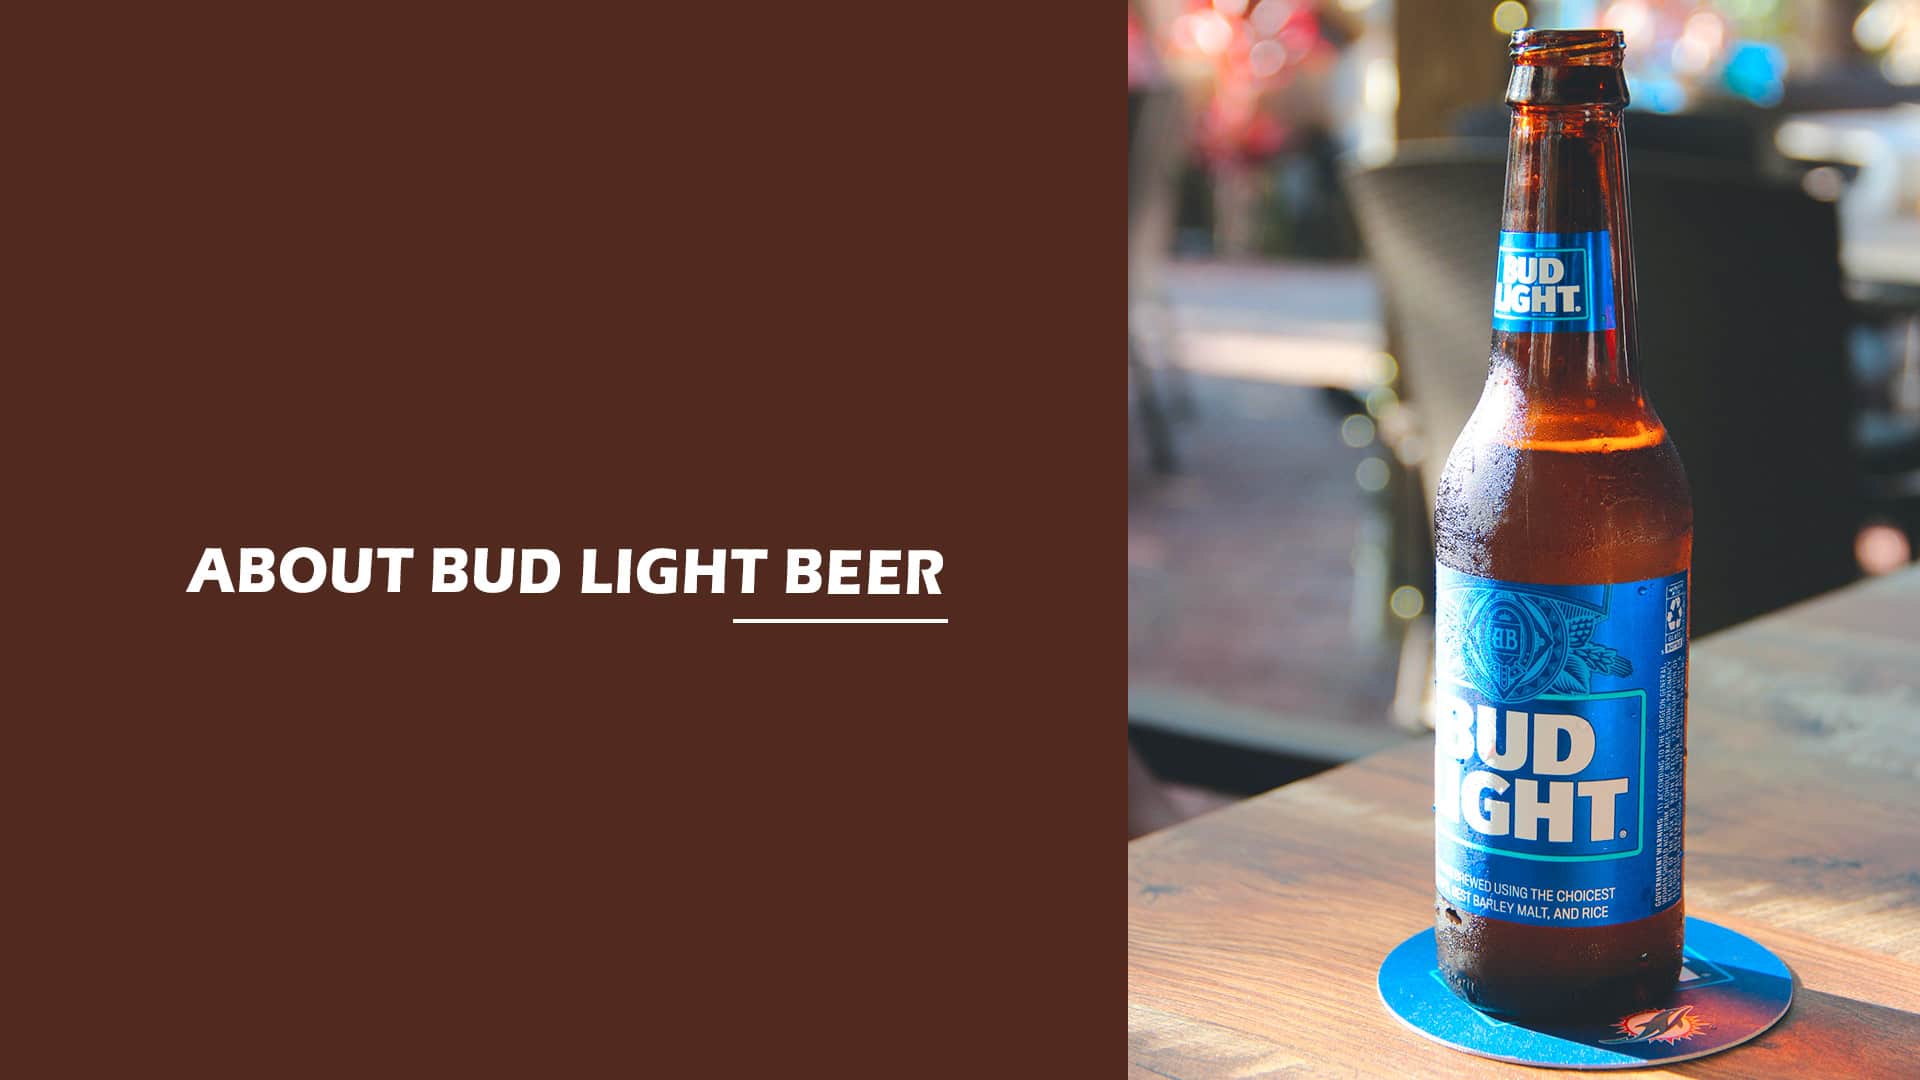 About Bud Light Beer The Most Popular American Beer Brand